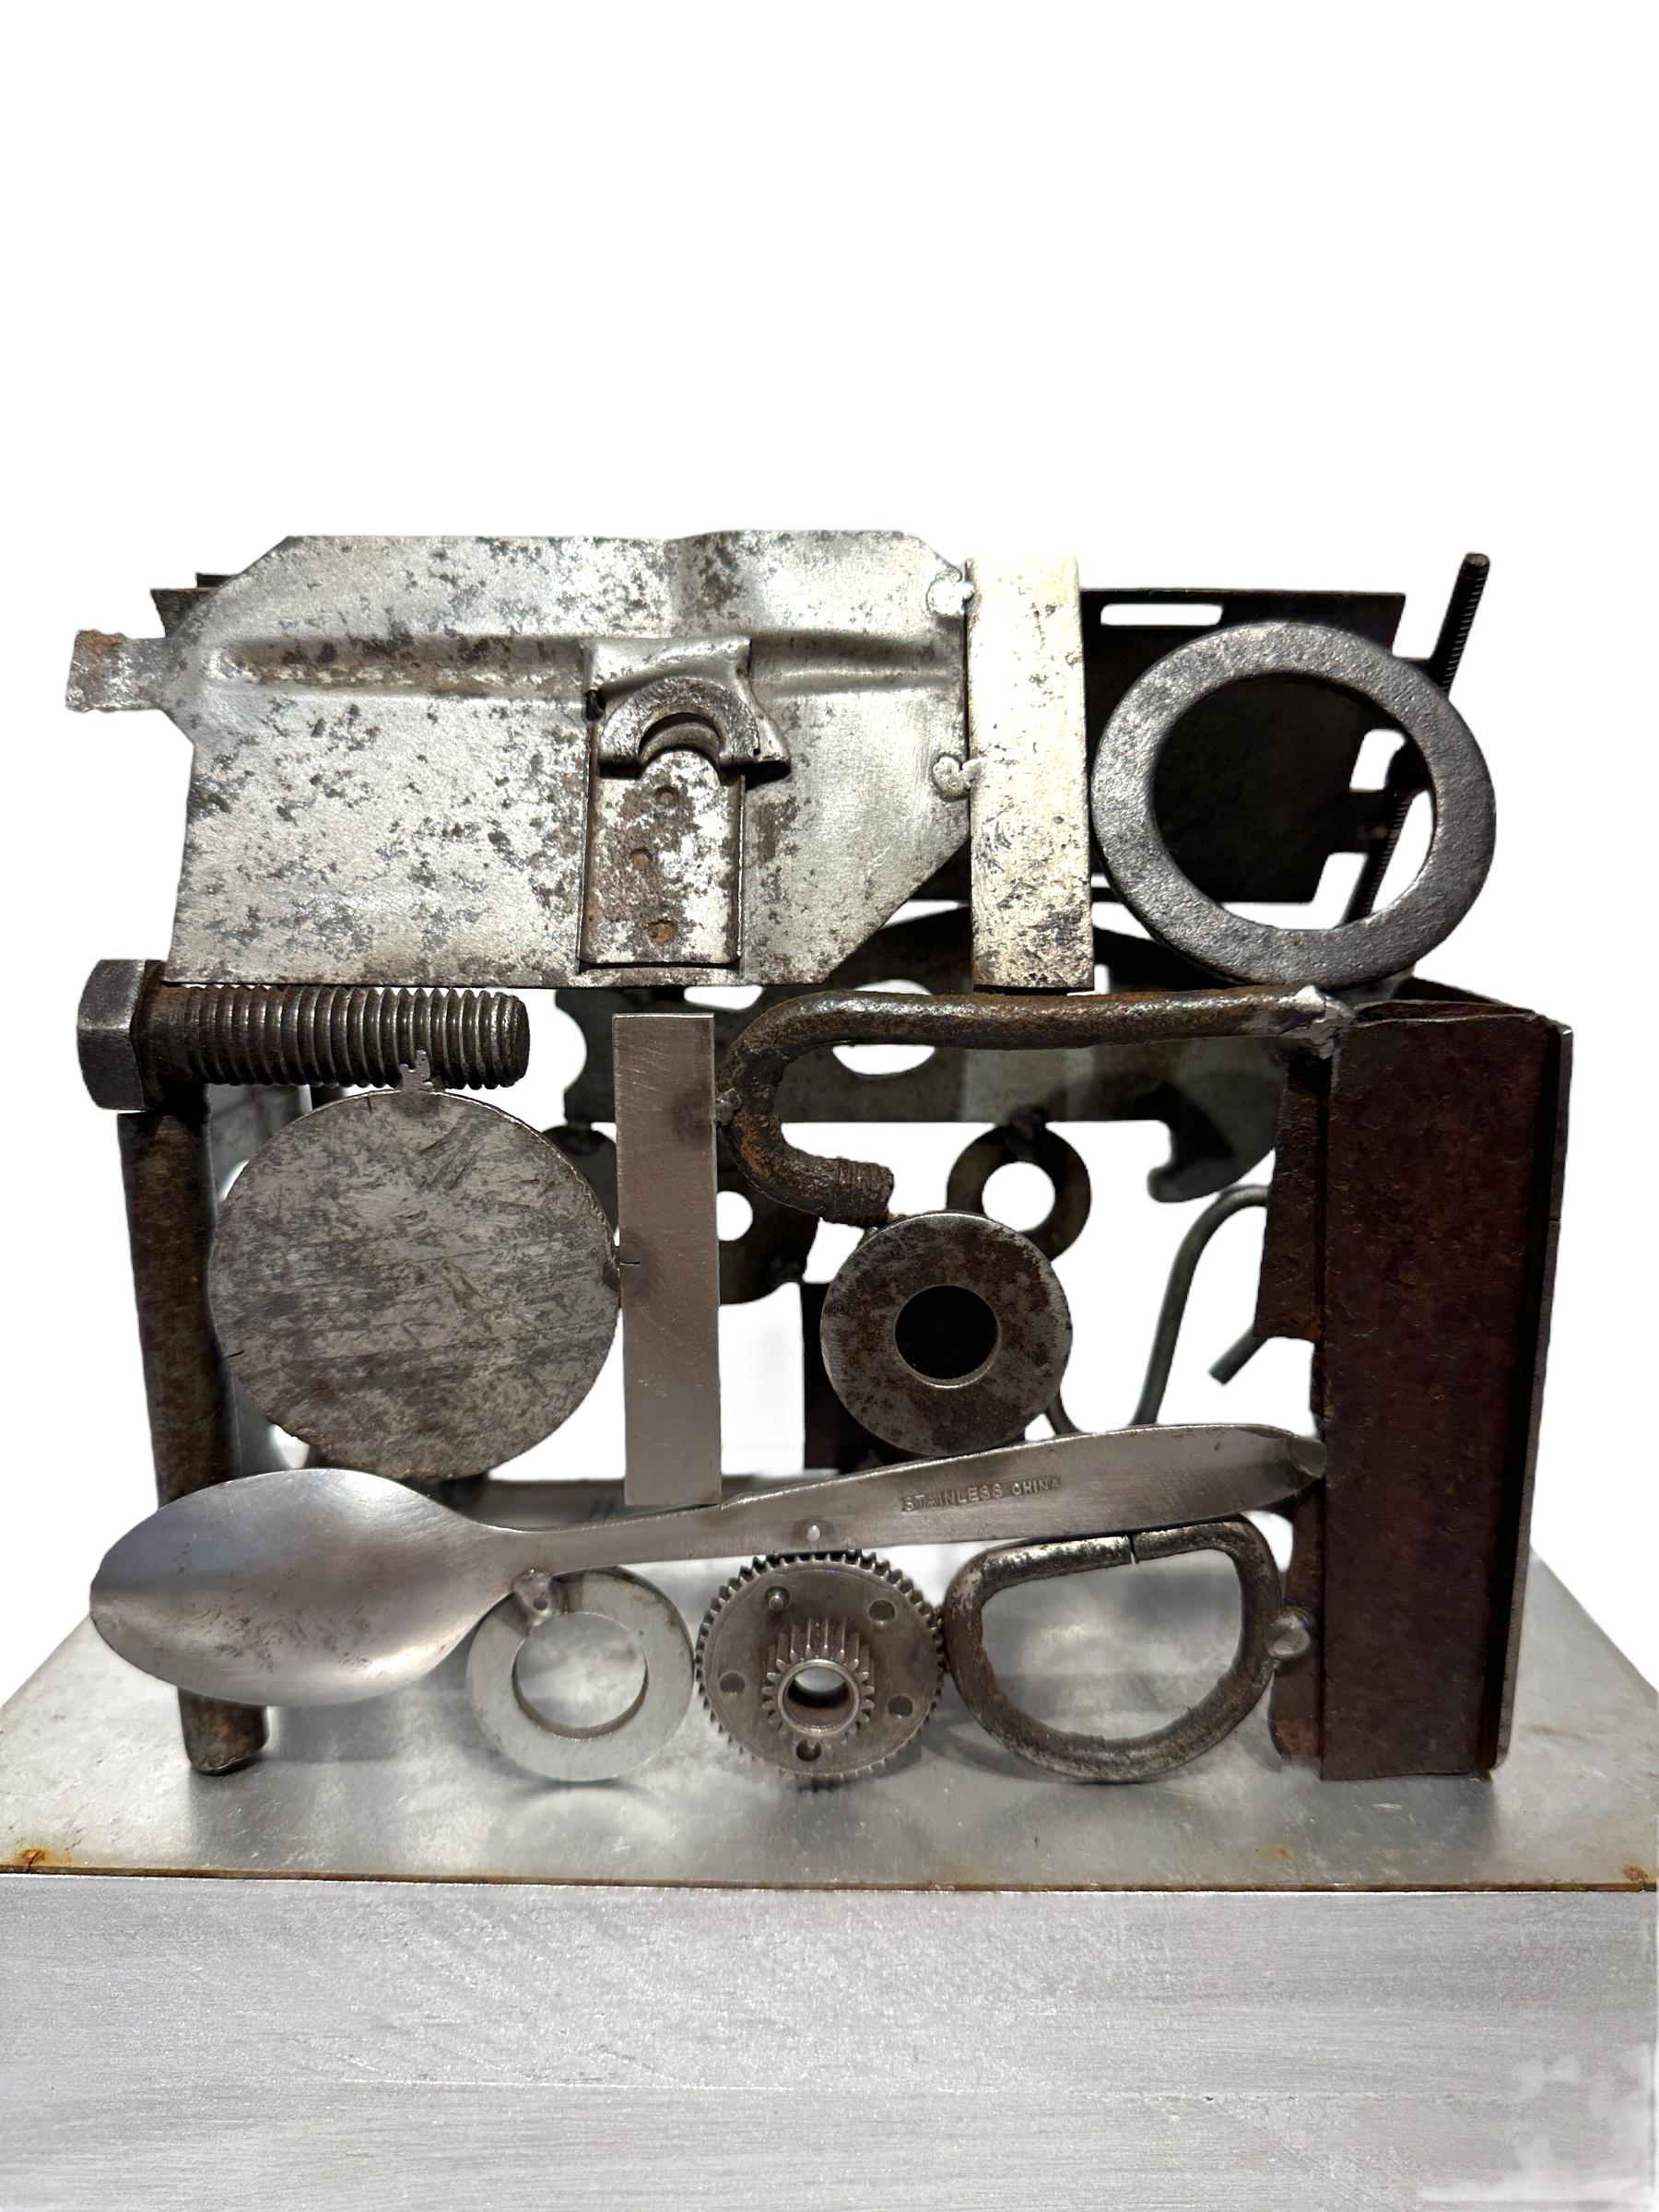 Welded Jim Rose - Construct No. 03, Salvaged Steel and Aluminum Industrial Objects For Sale